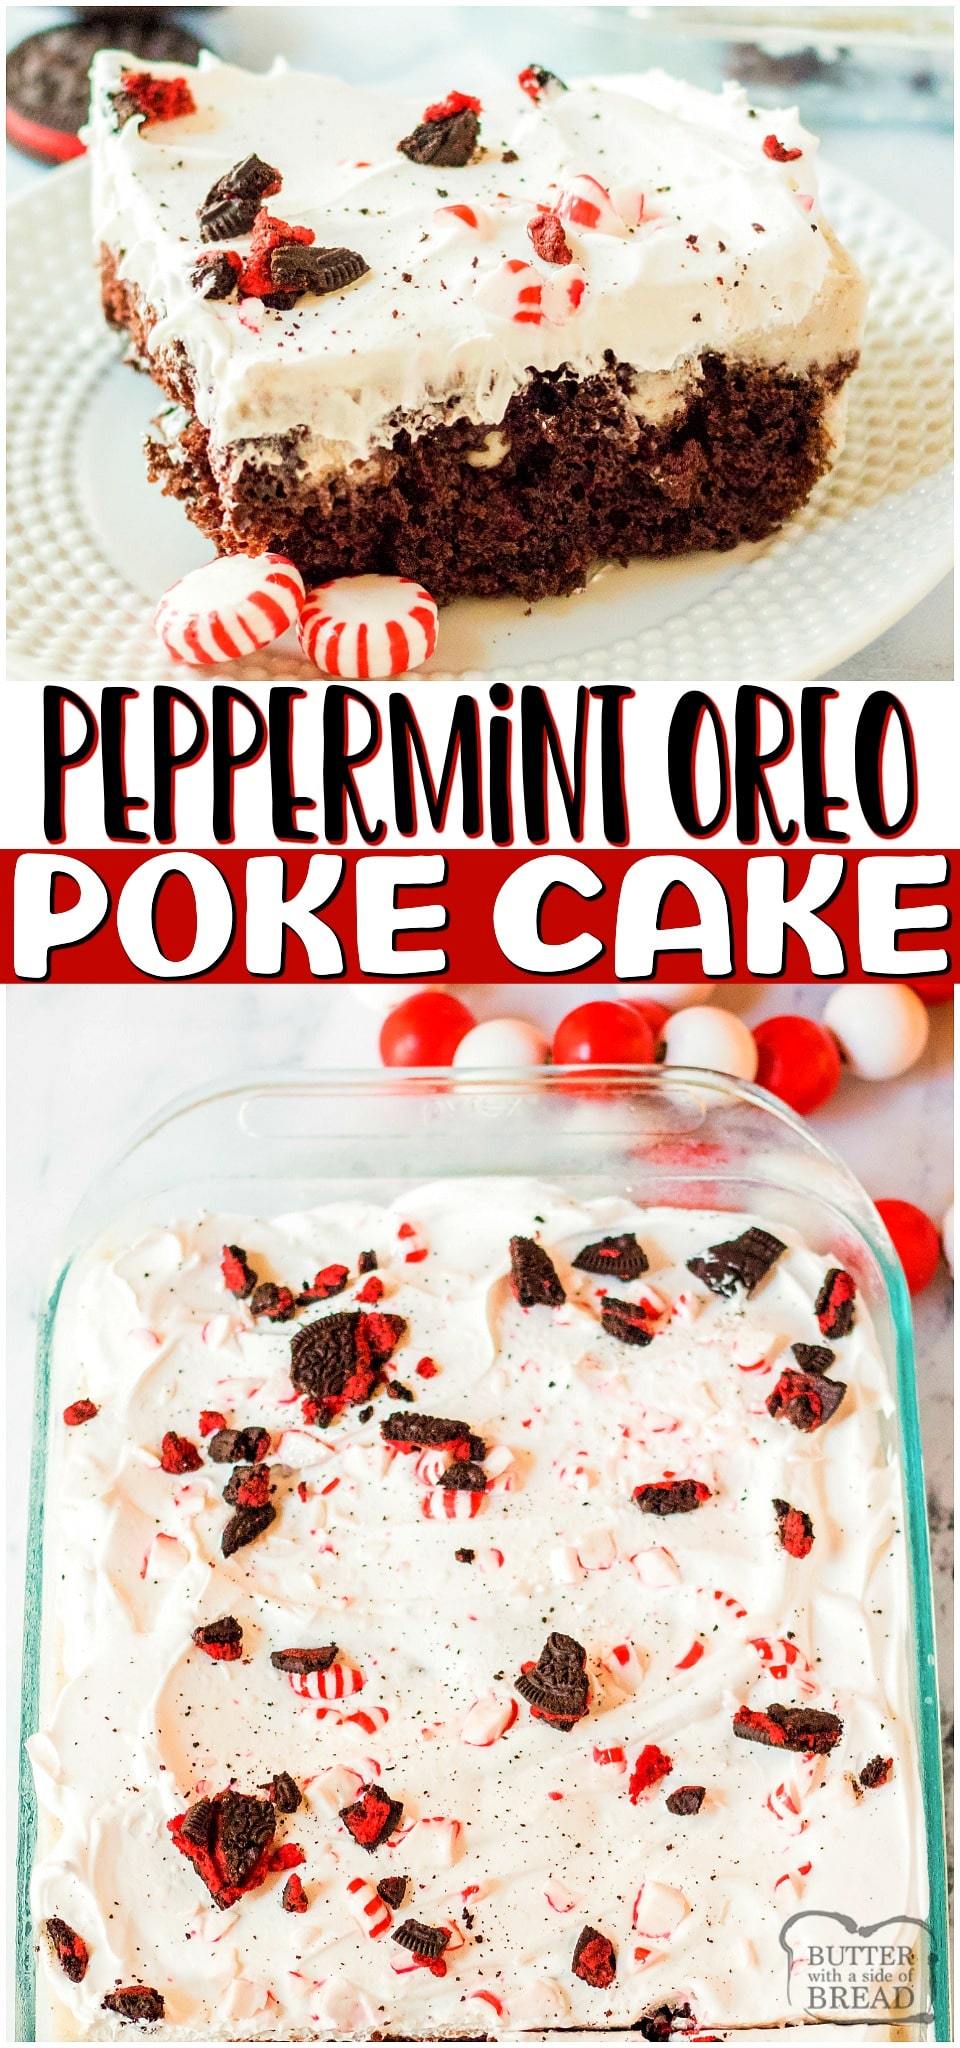 Peppermint Oreo Poke Cake uses a cake mix, cookies & cream pudding, whipped cream, Oreos & peppermint candies for a deliciously festive holiday cake! Easy Christmas cake recipe with peppermint cookie flavors. #oreo #peppermint #Christmas #holidays #cake #pokecake #easyrecipe from BUTTER WITH A SIDE OF BREAD